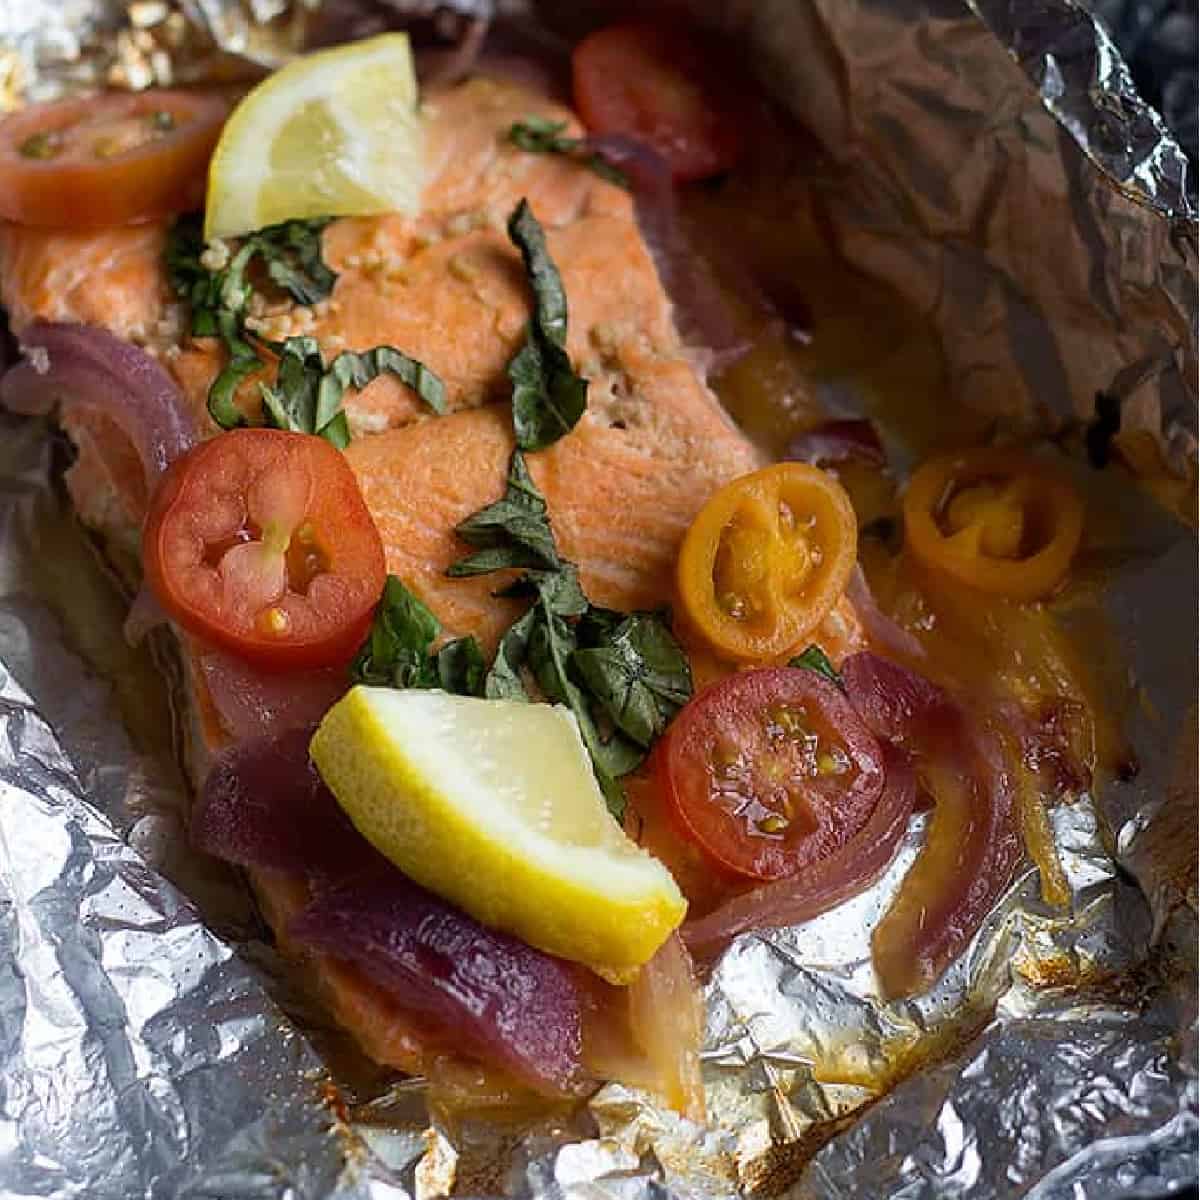 Baked salmon in foil is a simple weeknight dinner recipe. Made with a tasty honey lemon sauce, this salmon recipe is a keeper. 